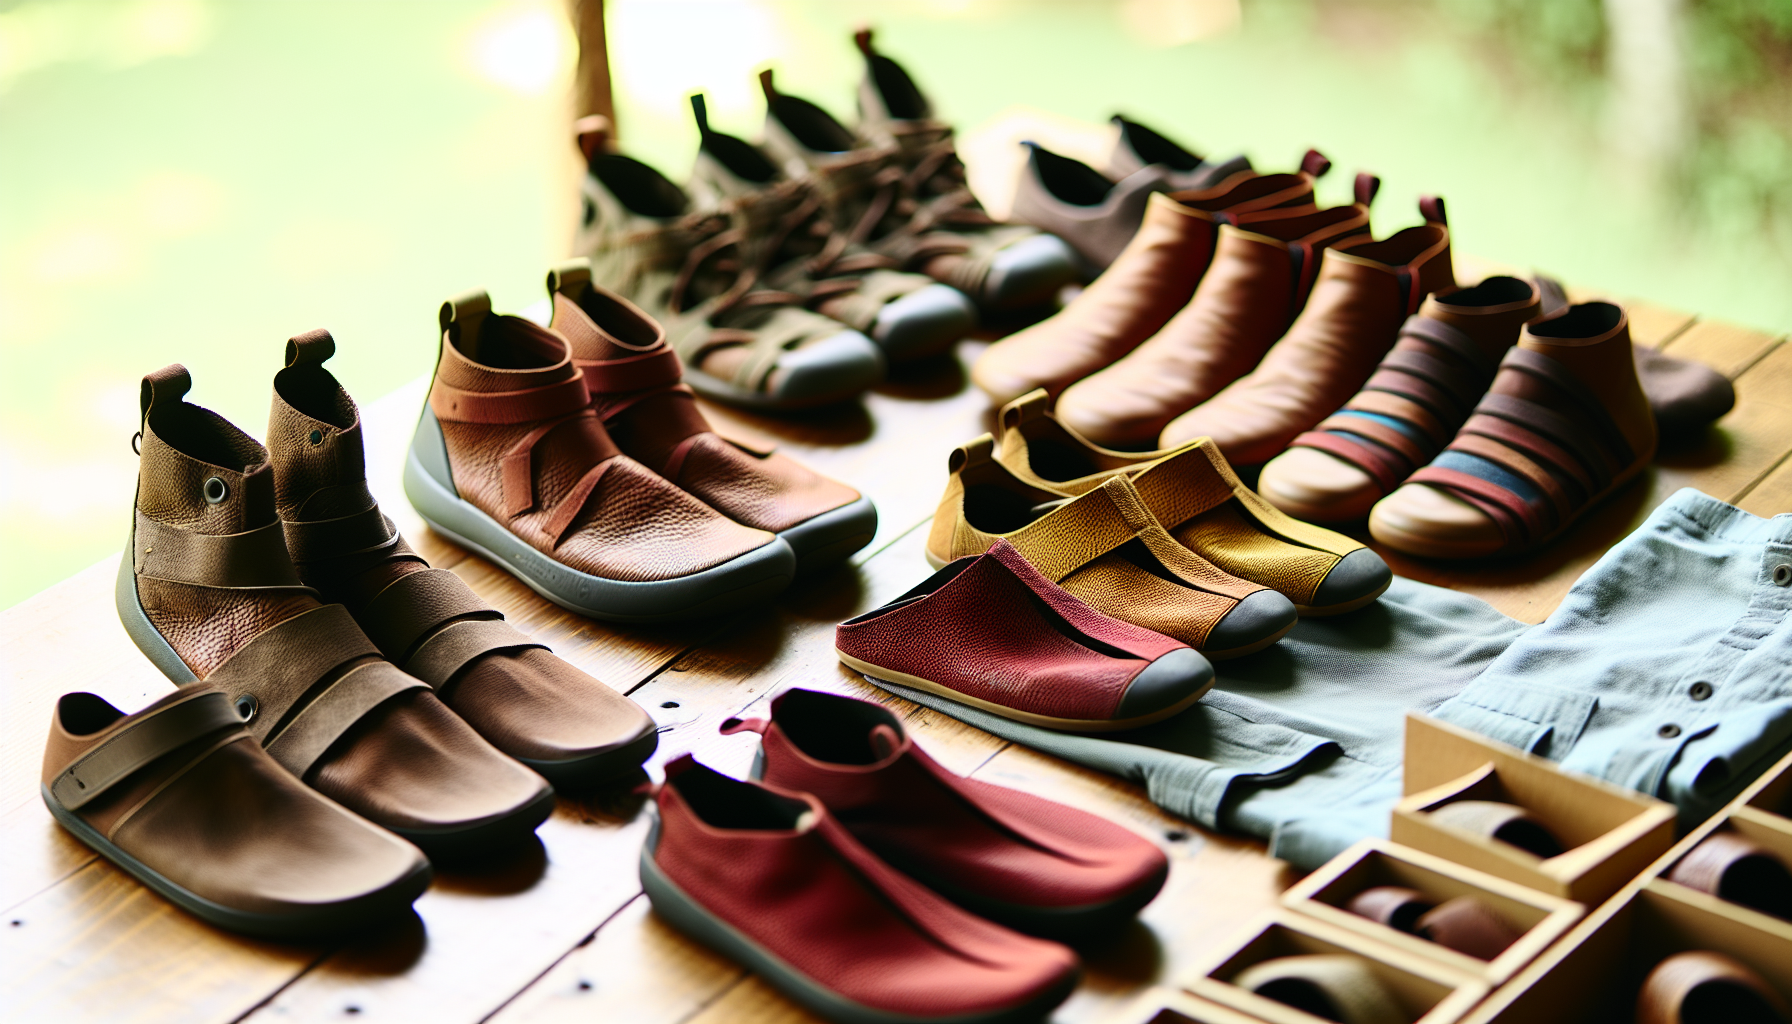 Photo of various barefoot shoe options for different foot shapes